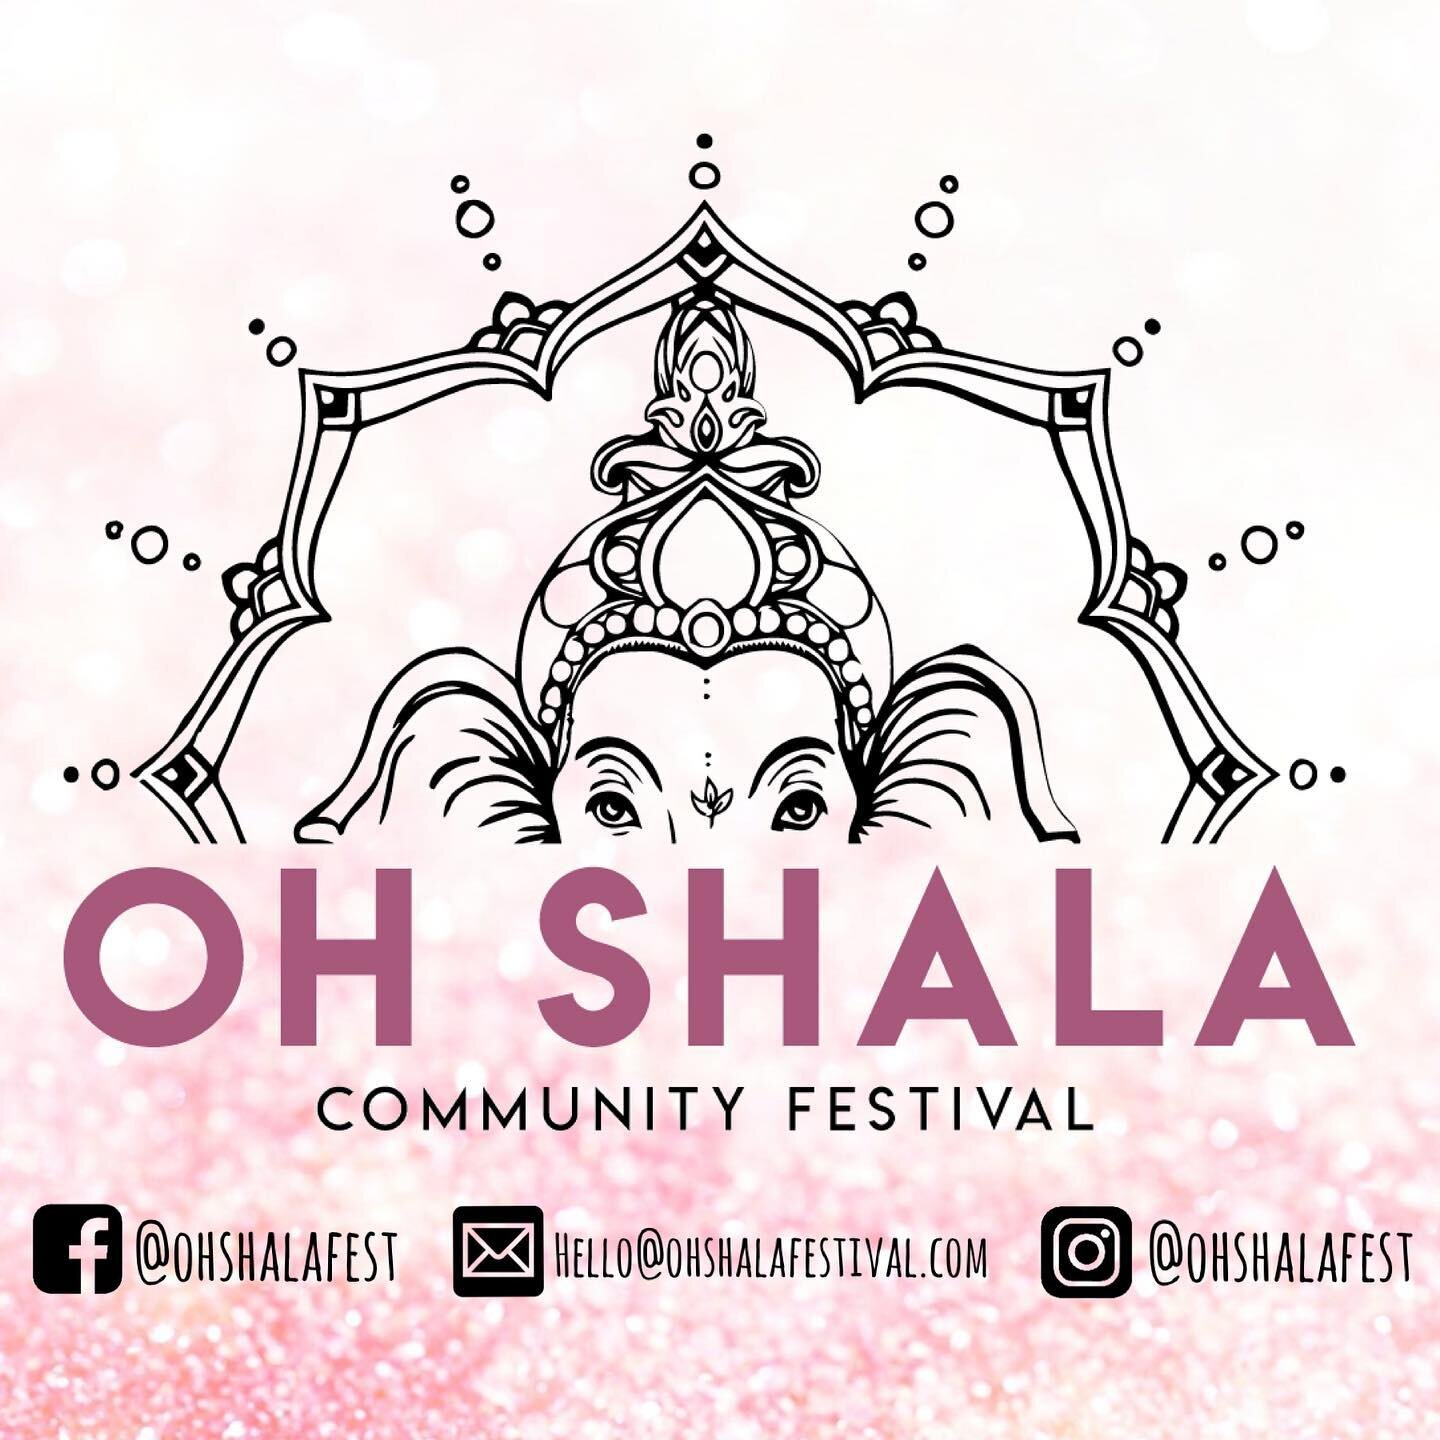 If you have any questions or queries please do hesitate to contact us on social media or head to www.theopenshala.com and click on &lsquo;oh shala festival 2022&rsquo;